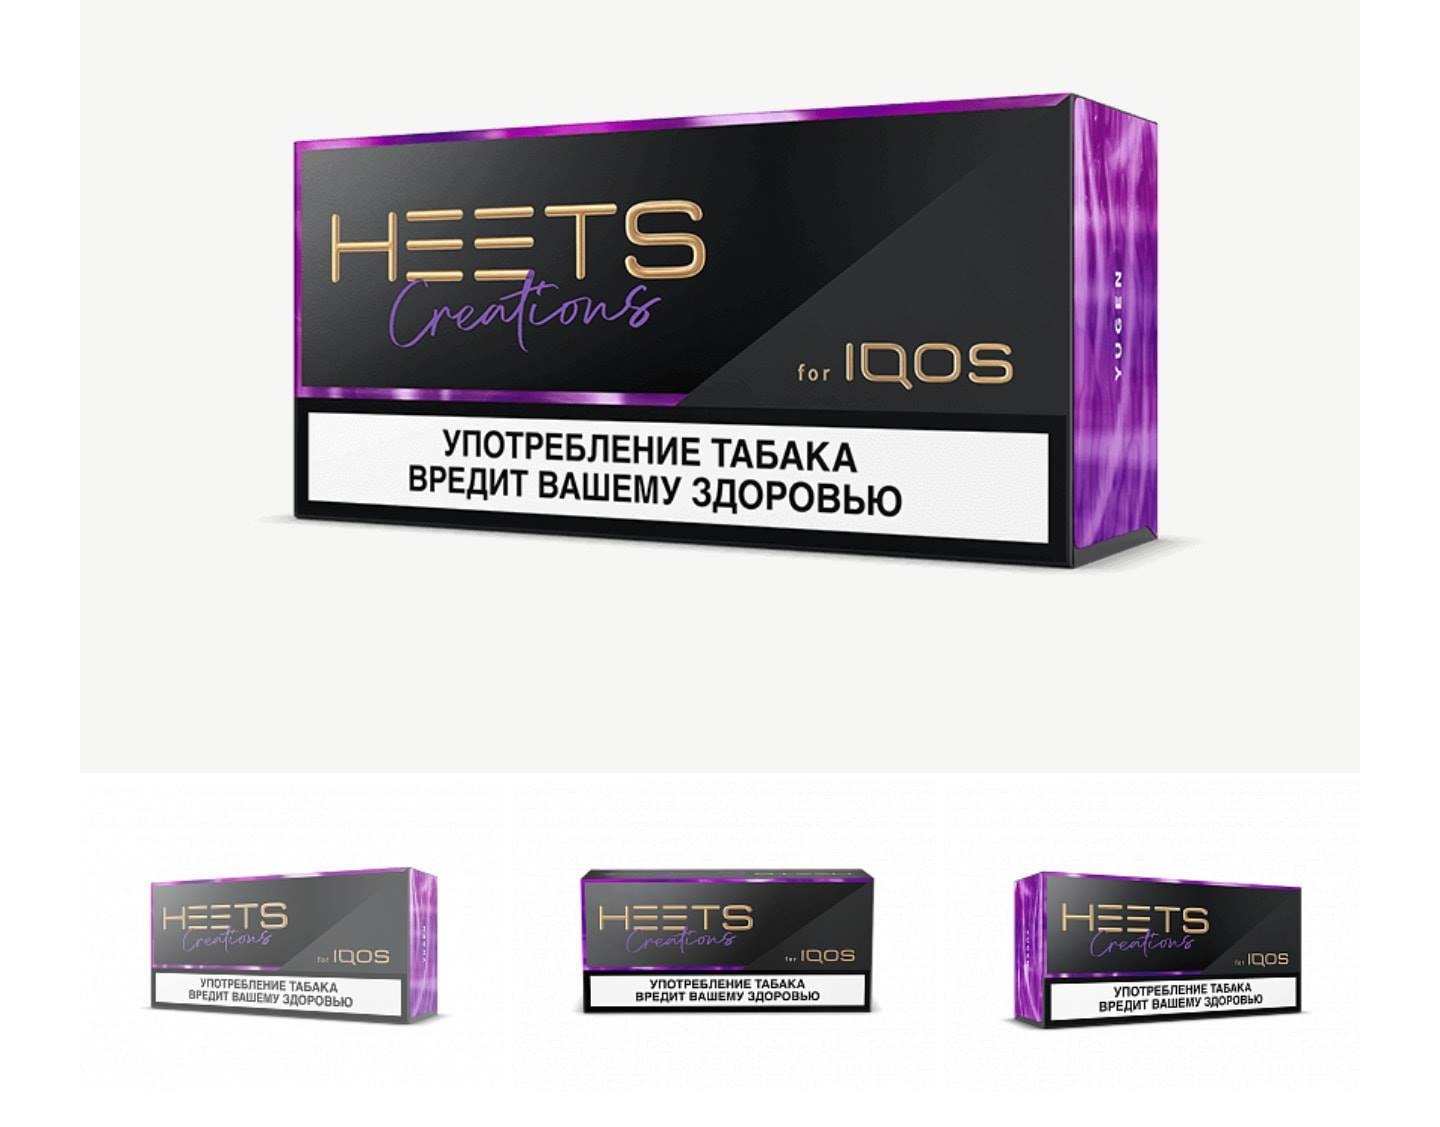 8 Most Popular IQOS Heets Flavors in The World – IQOS Dubai UAE